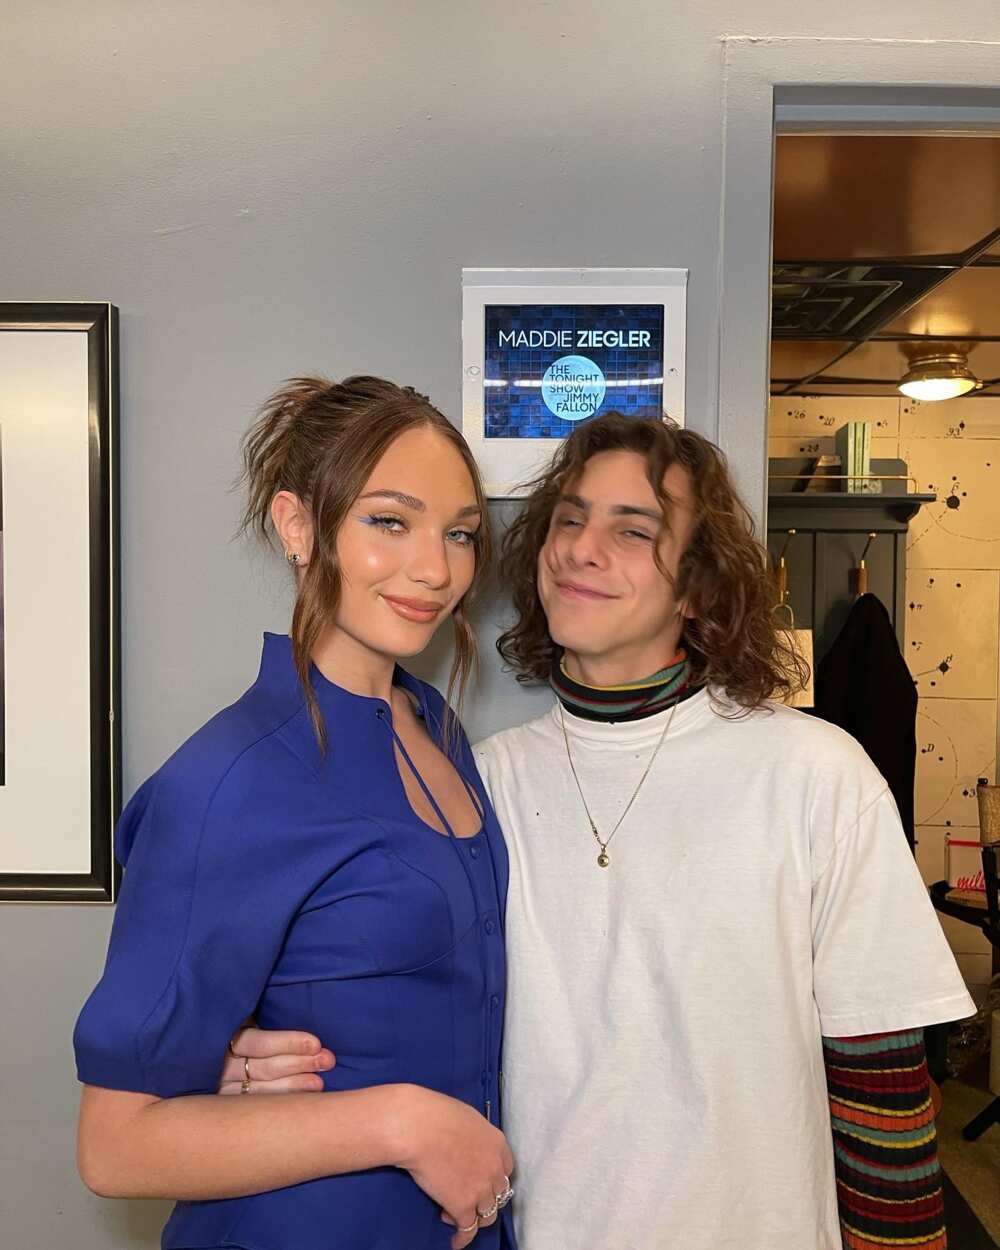 Who is Maddie Ziegler dating?